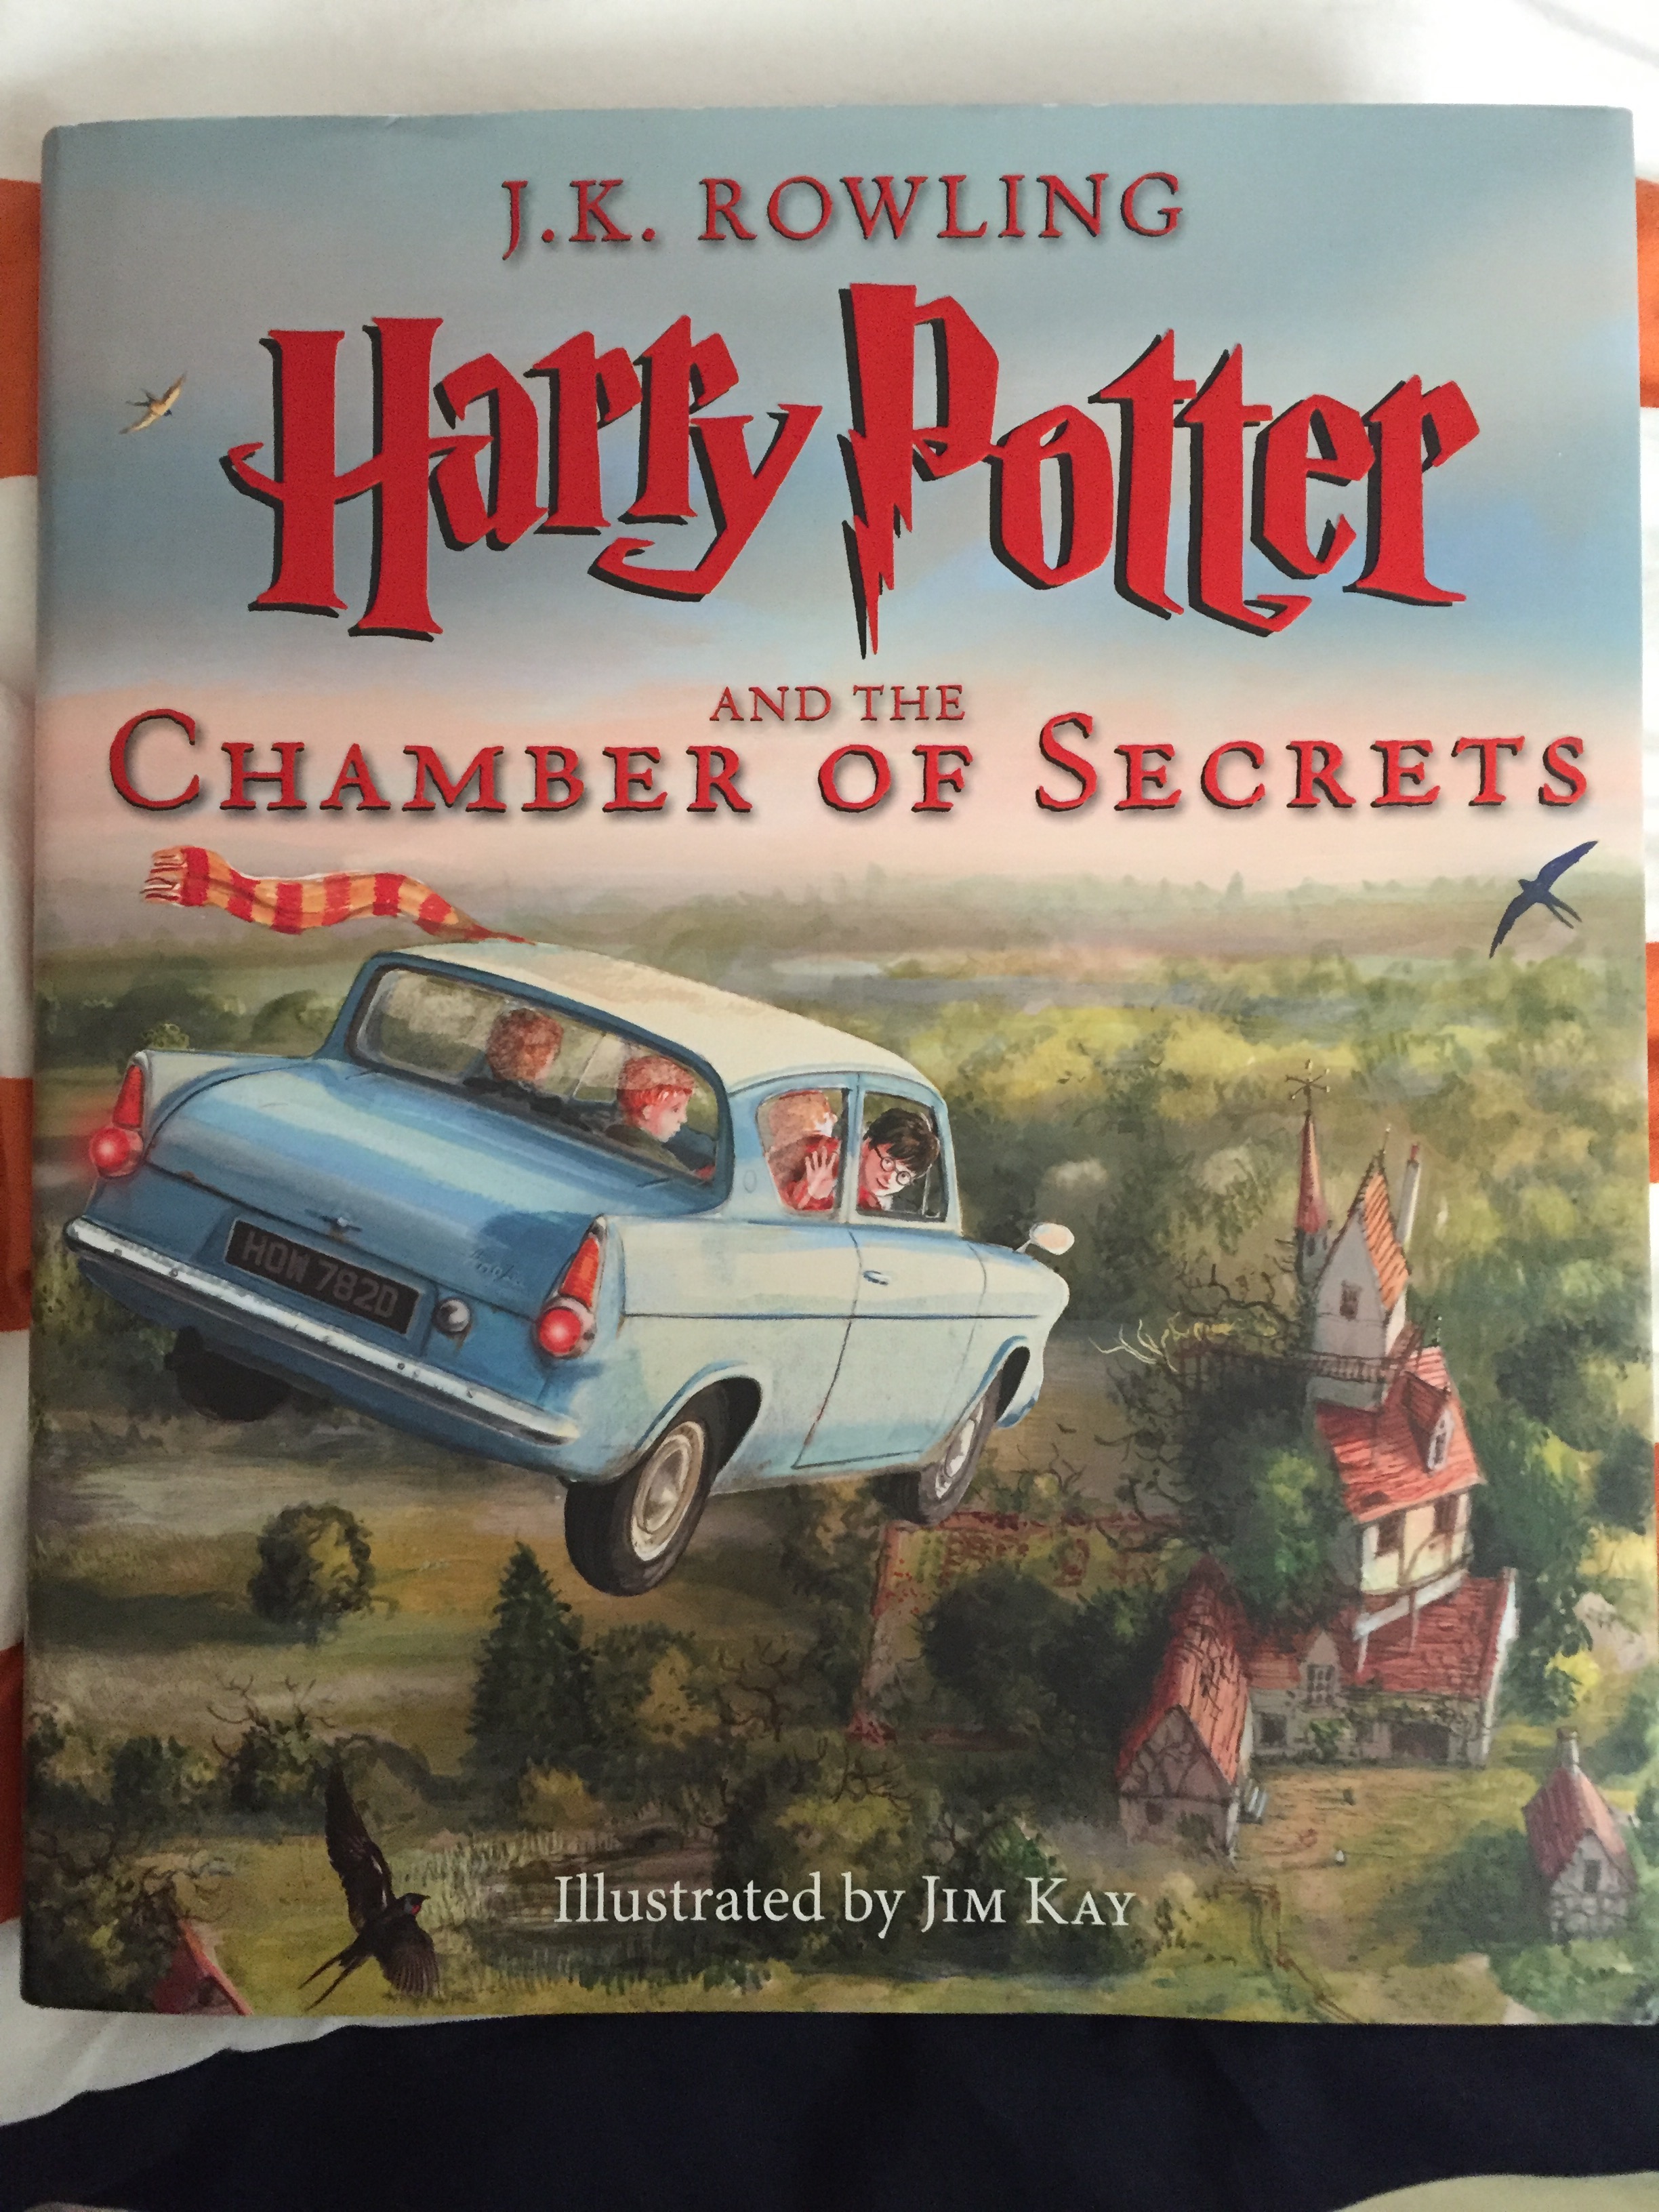 20 Years on Screen: Harry Potter and the Chamber of Secrets - MinaLima